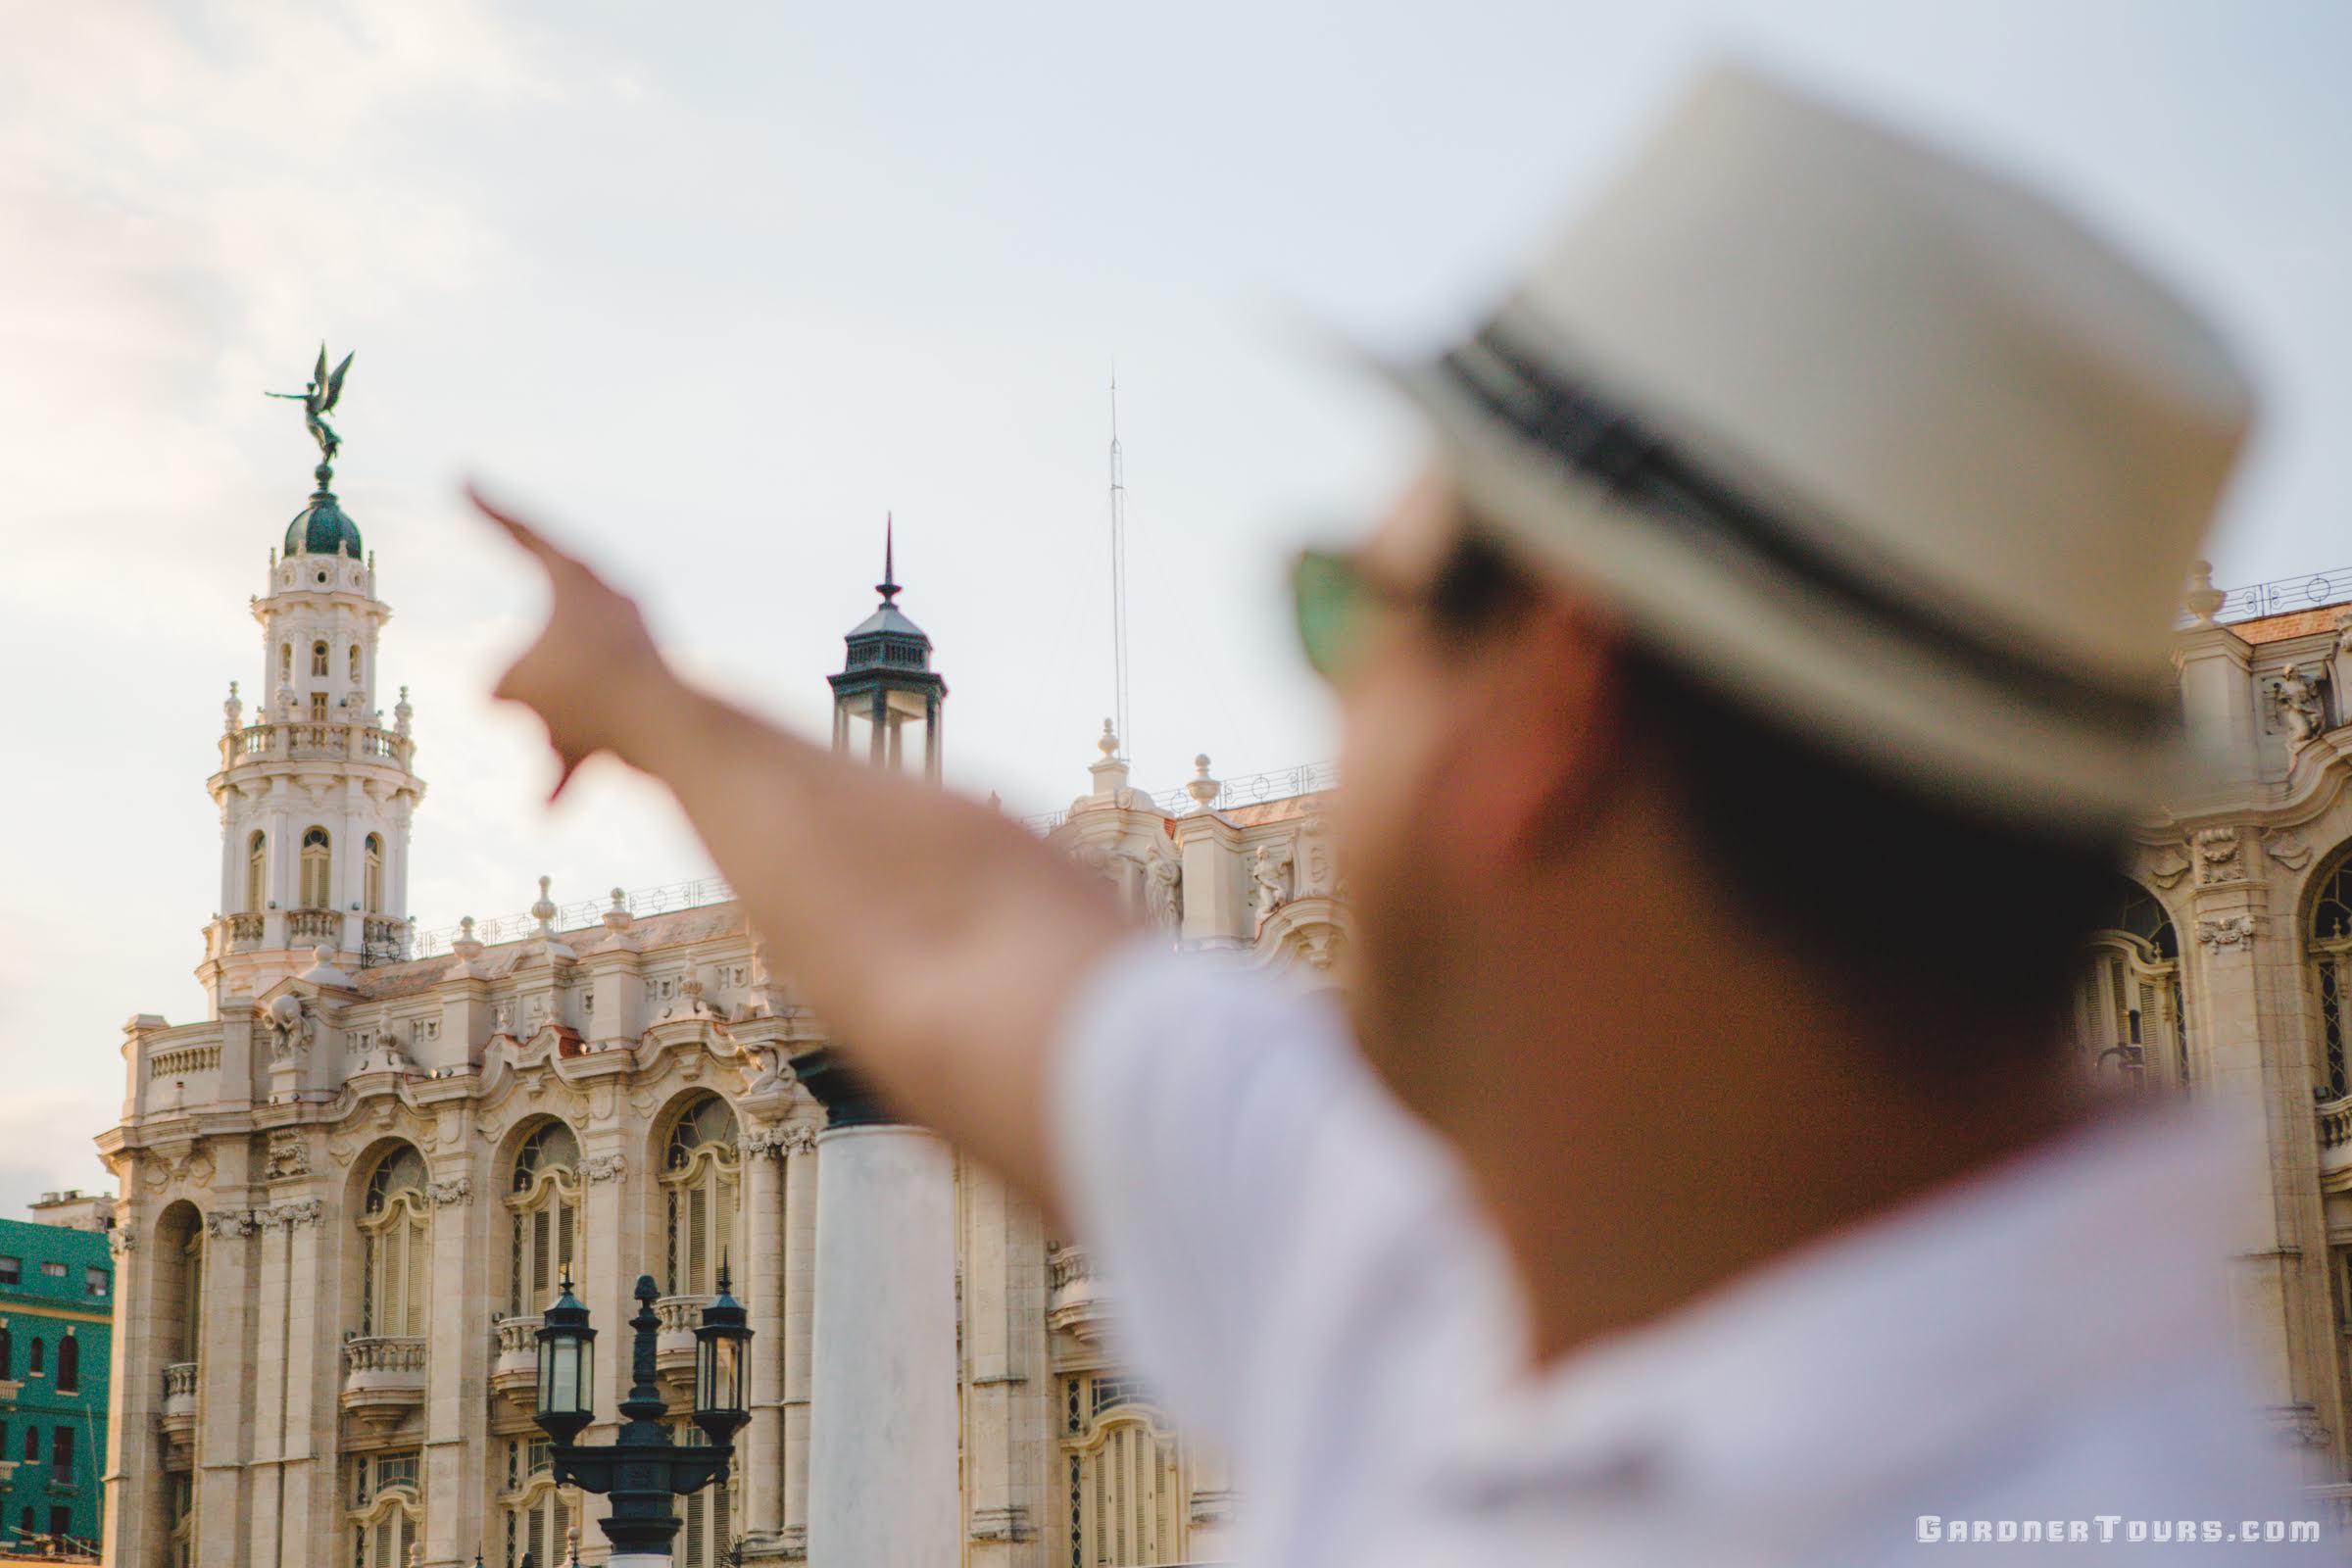 Cuban Tourist Pointing At Angel On Top Of Grand Theatre In Havana Cuba